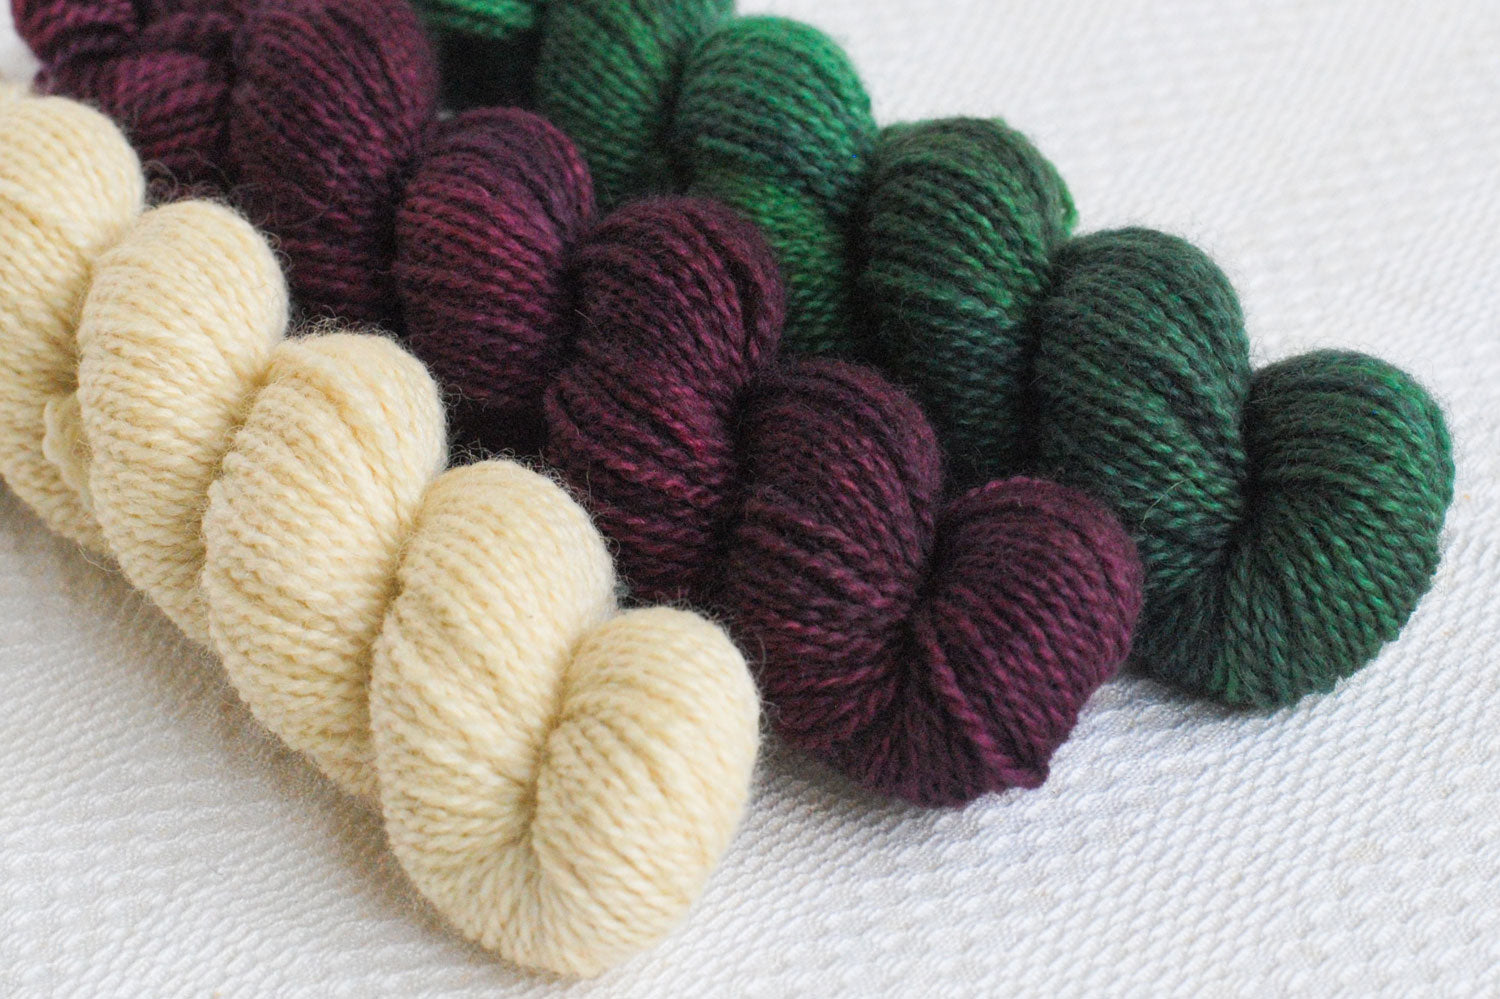 Set of three hand-dyed mini-skeins in natural, burgundy, and dark green